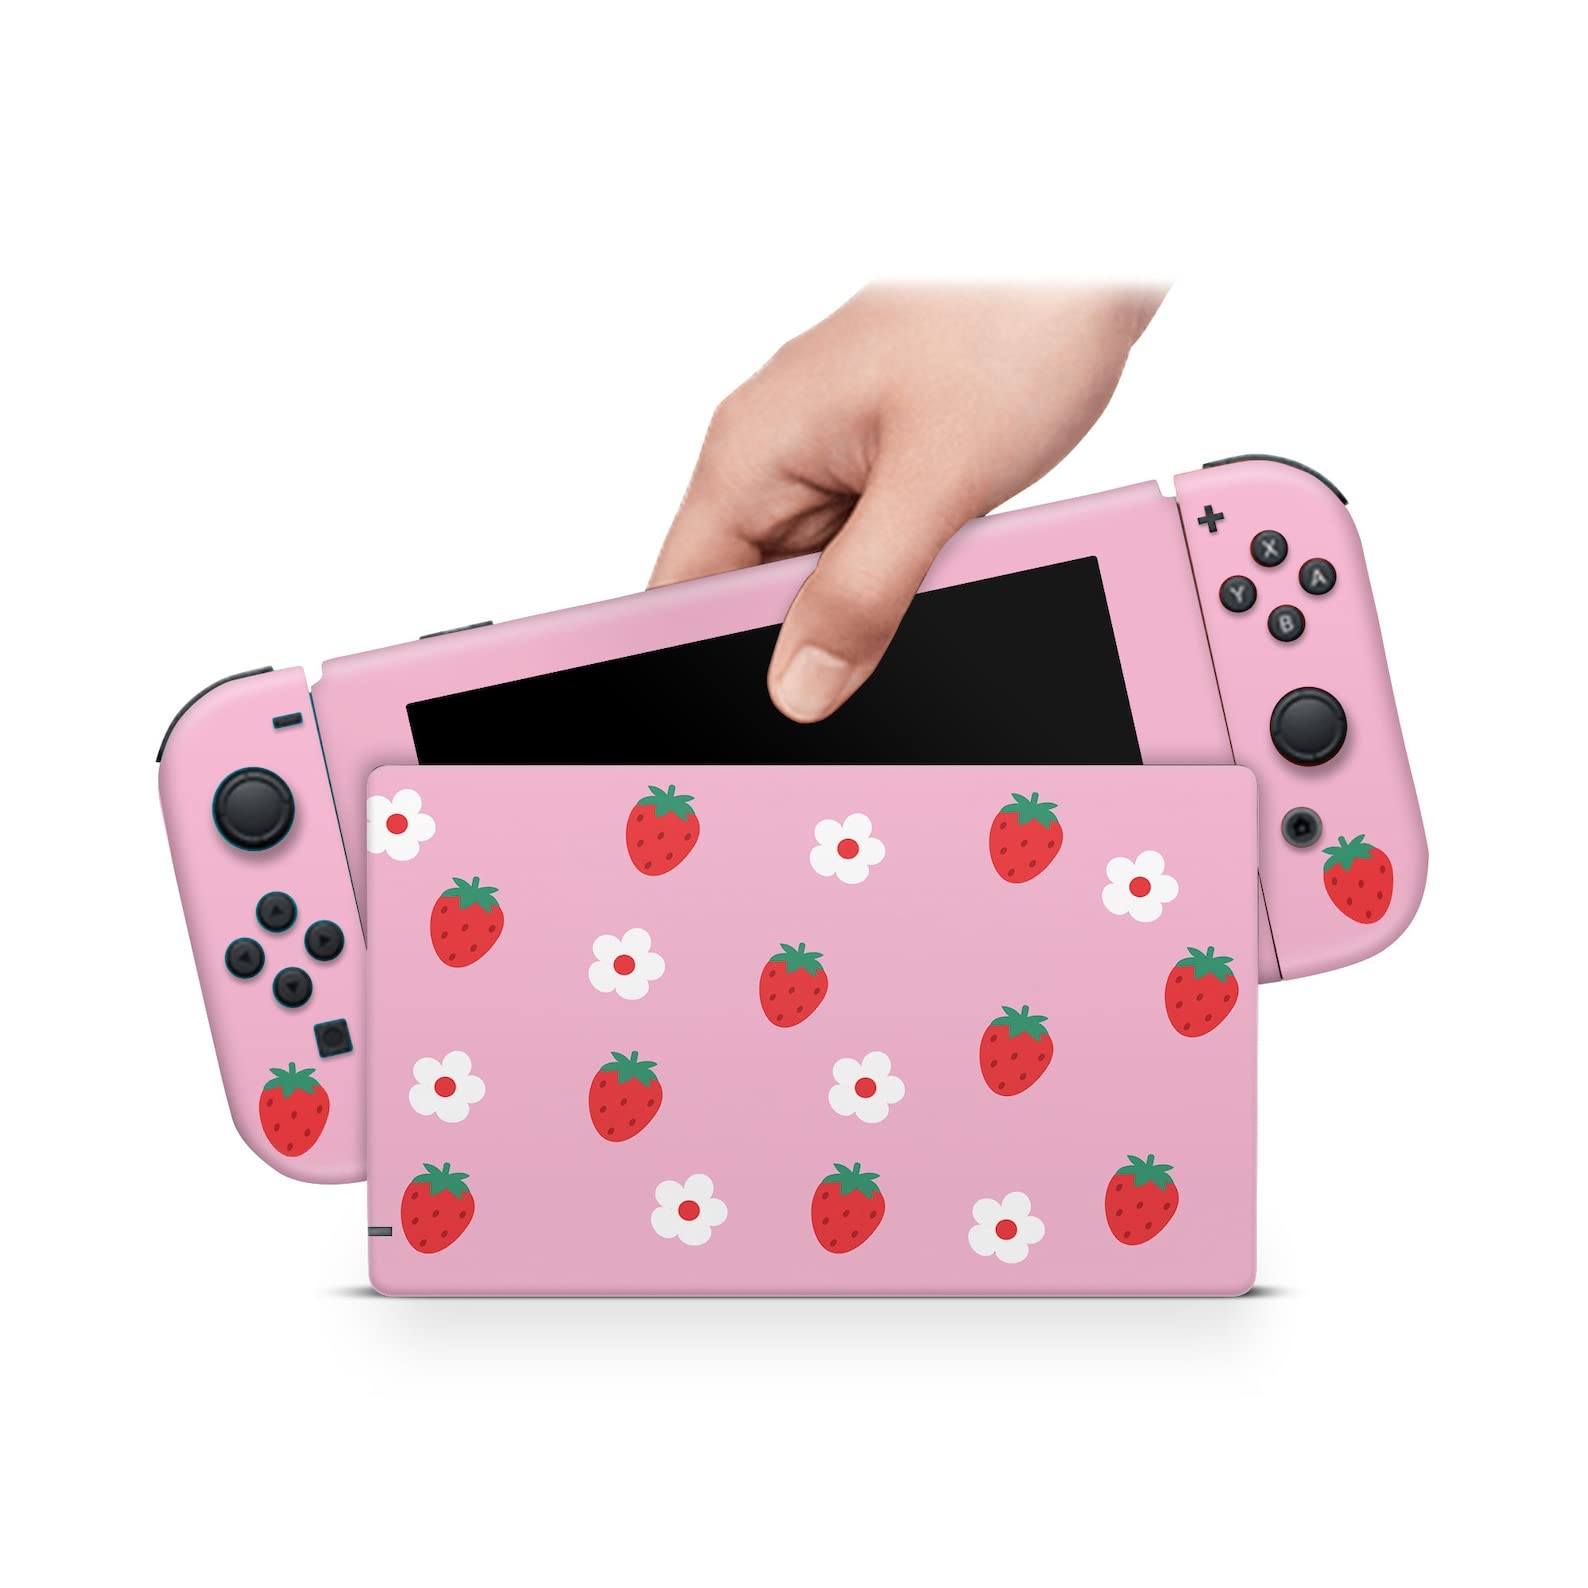 Studio Ghibli Anime Nintendo Switch Skin Sticker NintendoSwitch stickers  skins for Nintend Switch Console and Joy-Con Controller - Price history &  Review | AliExpress Seller - Console-Skin Store | Alitools.io